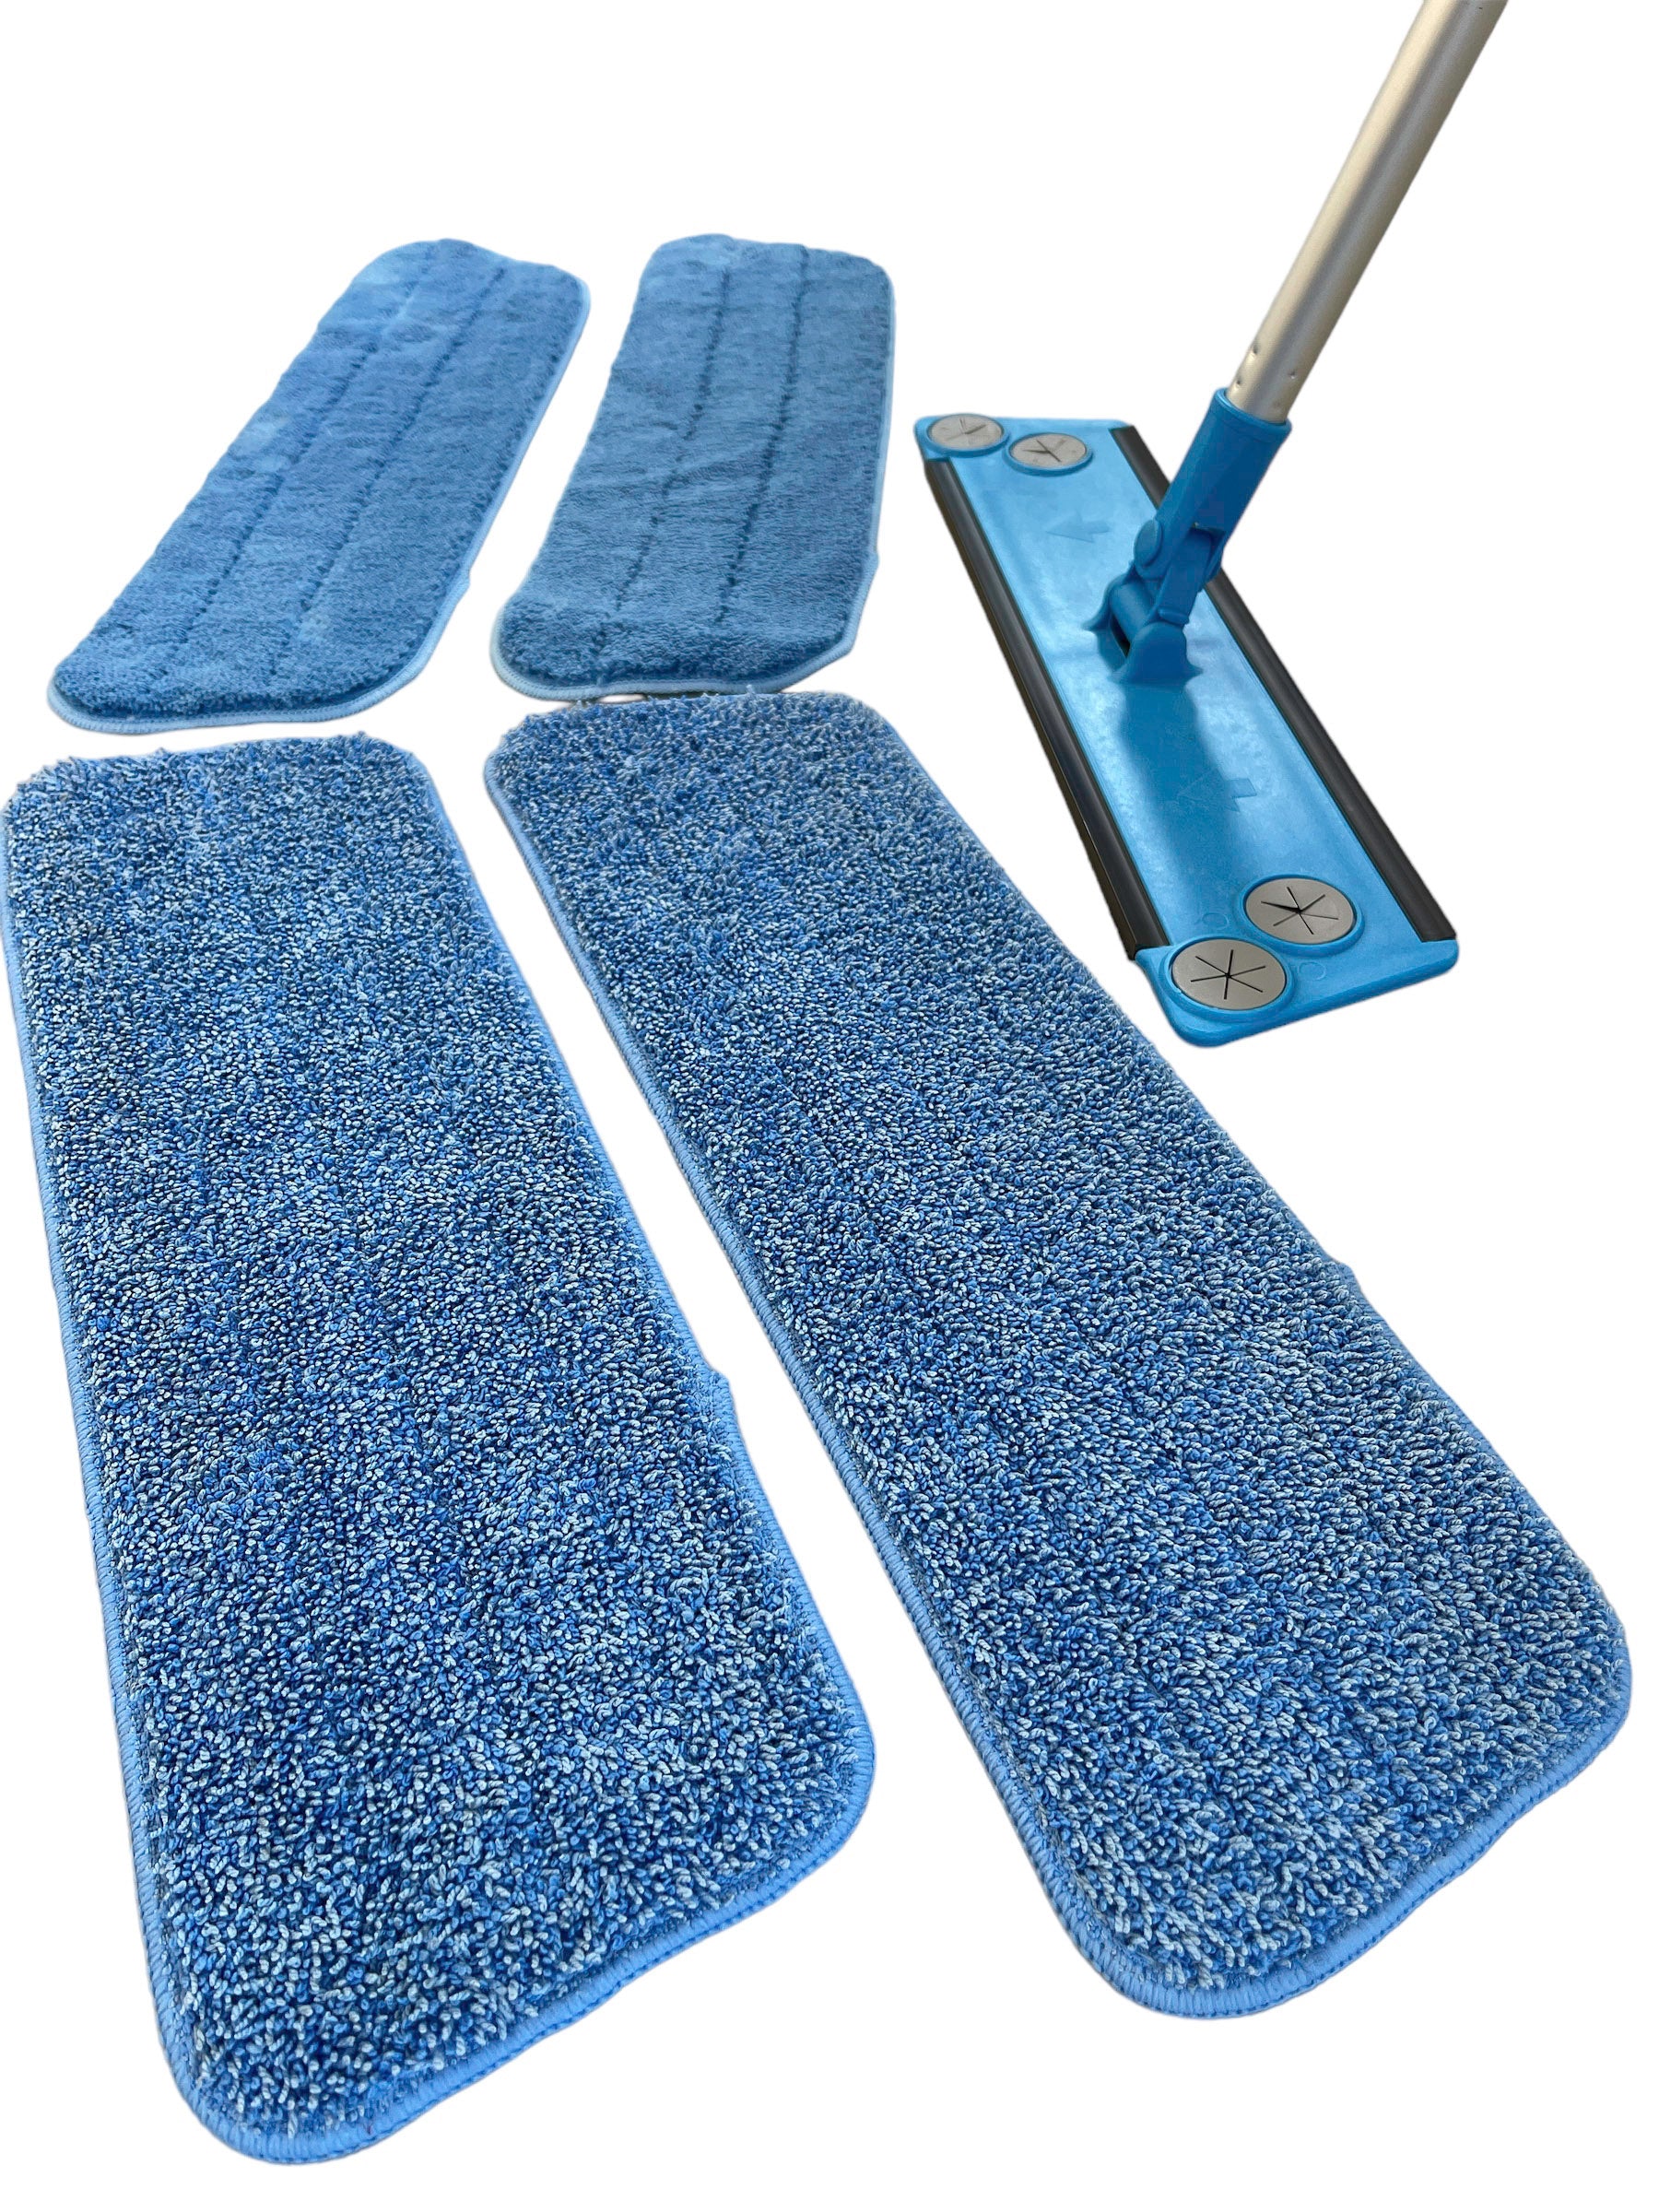 Discover the Magic of Mop Pads for Effortless Cleaning!